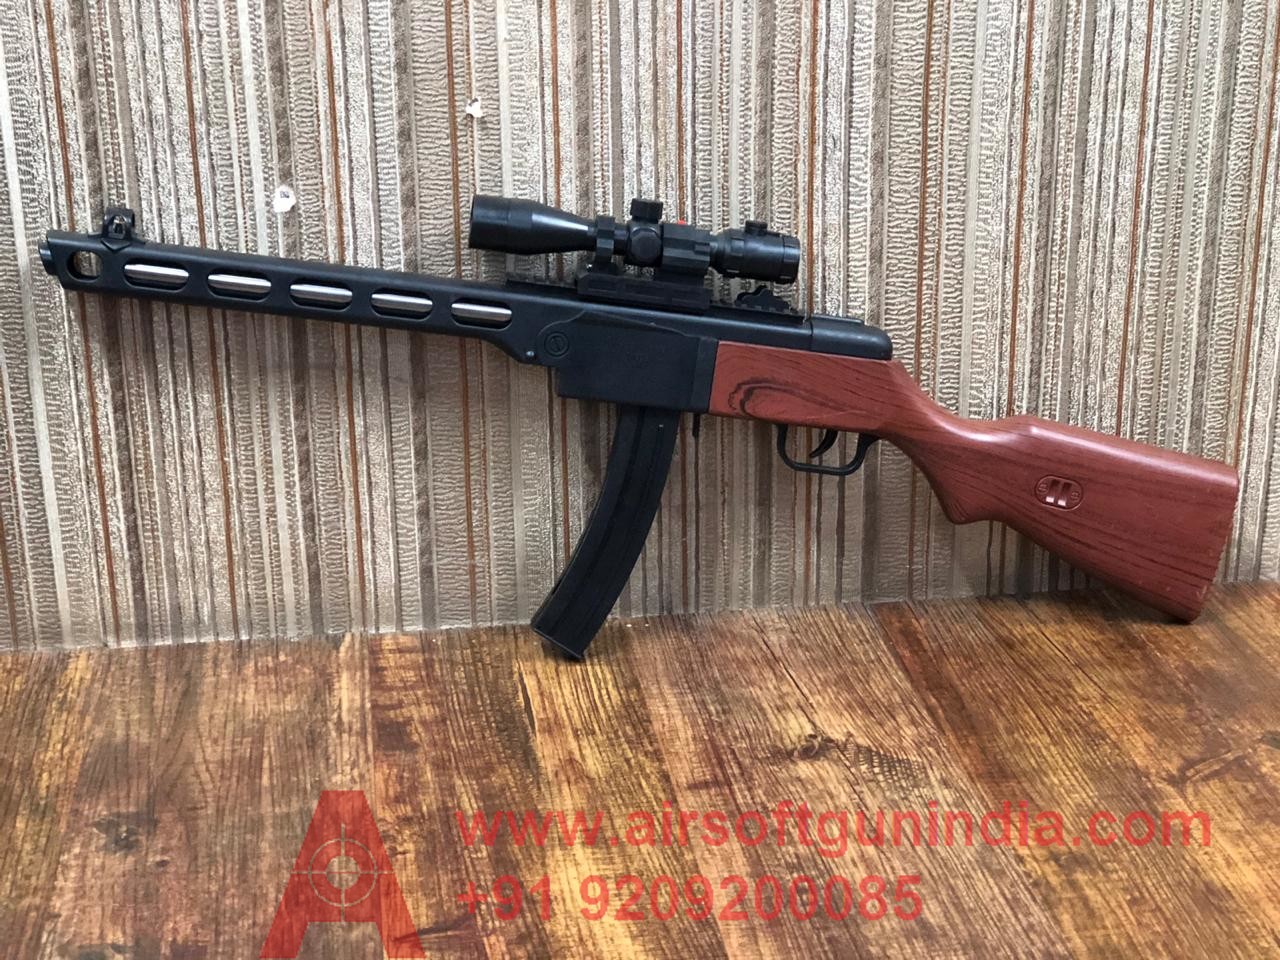 PPSH41 Airsoft Toy Rifle For Kids By Airsoft Gun India